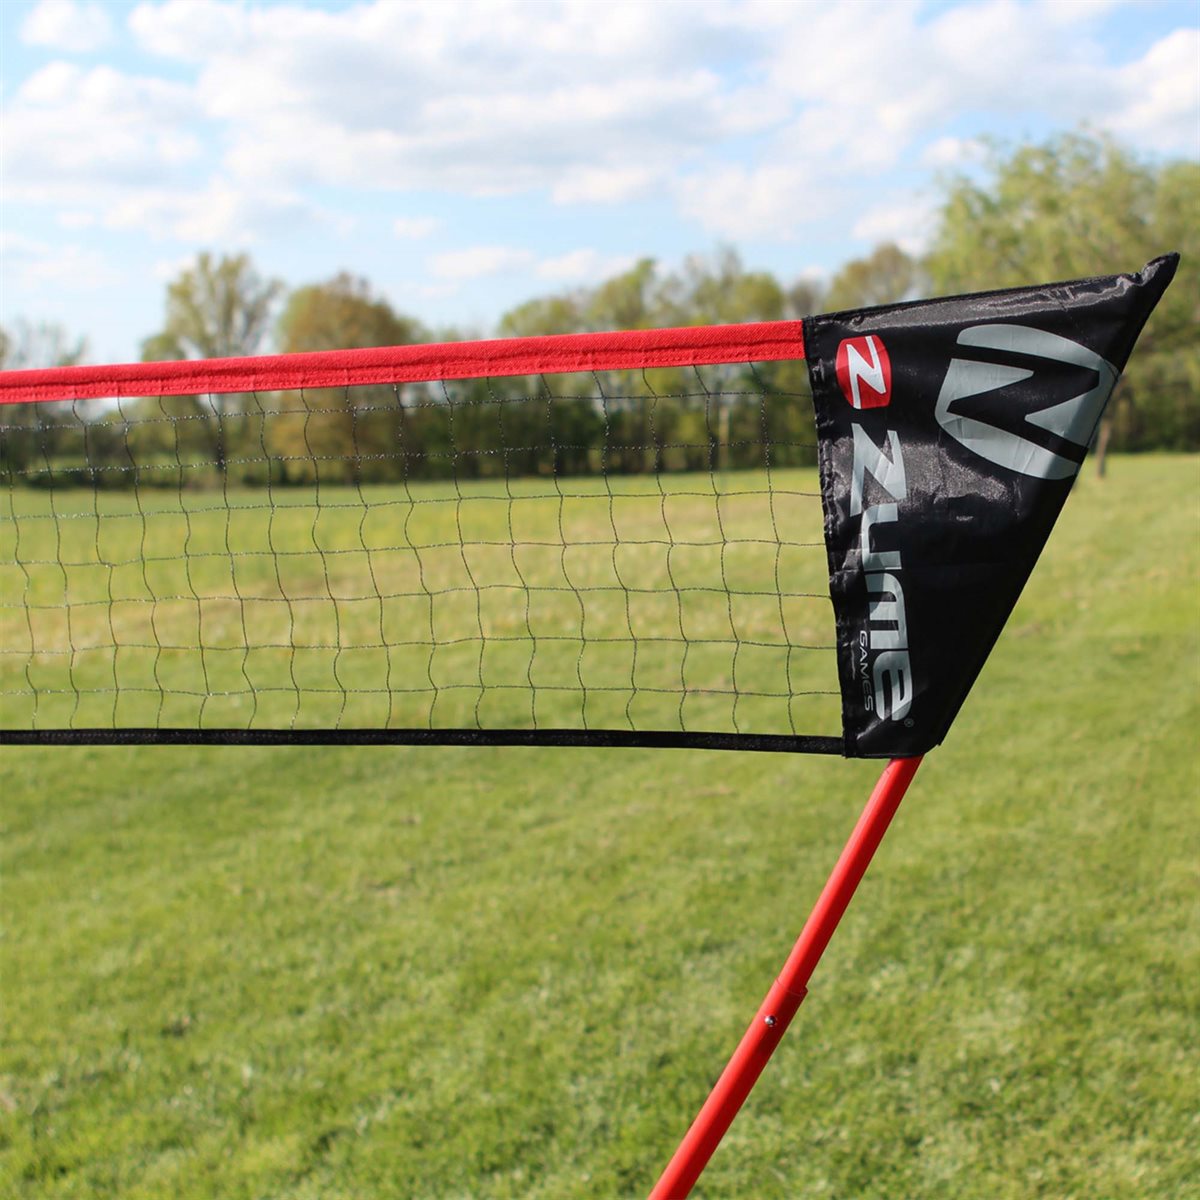 ZUME GAMES Player Outdoor Backyard Portable Badminton Set with Case  Black Red